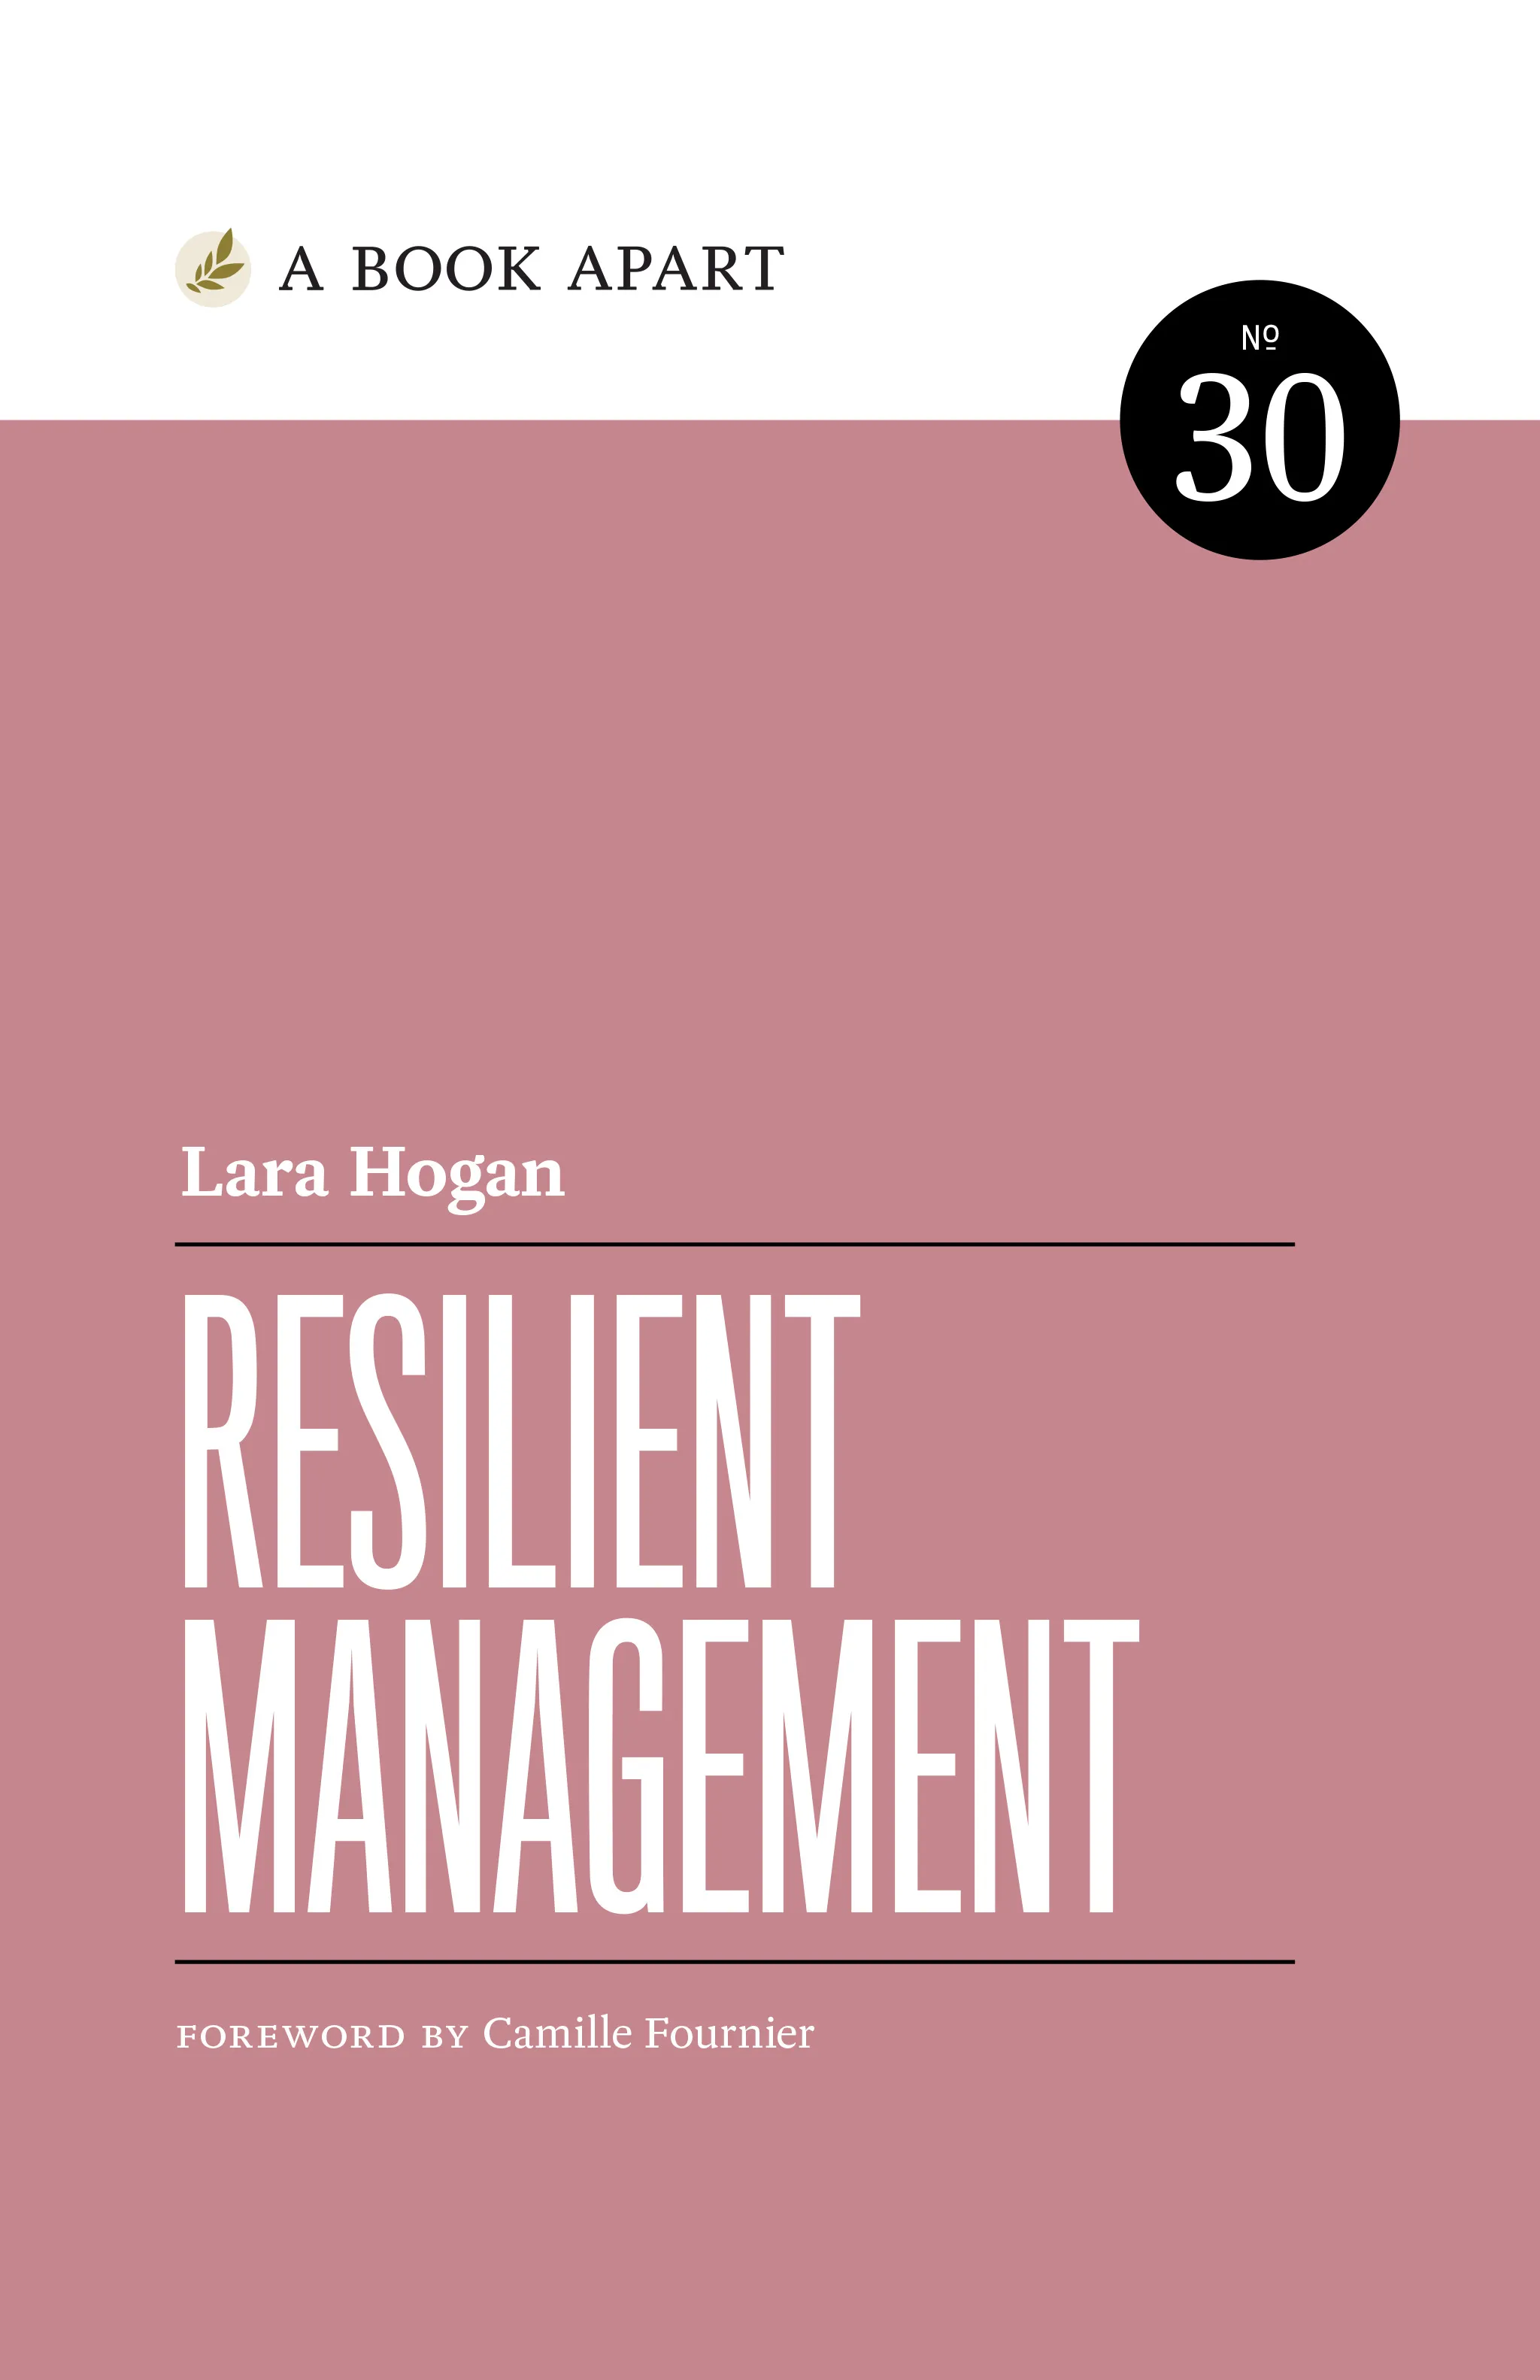 Cover of the book title Resilient Management